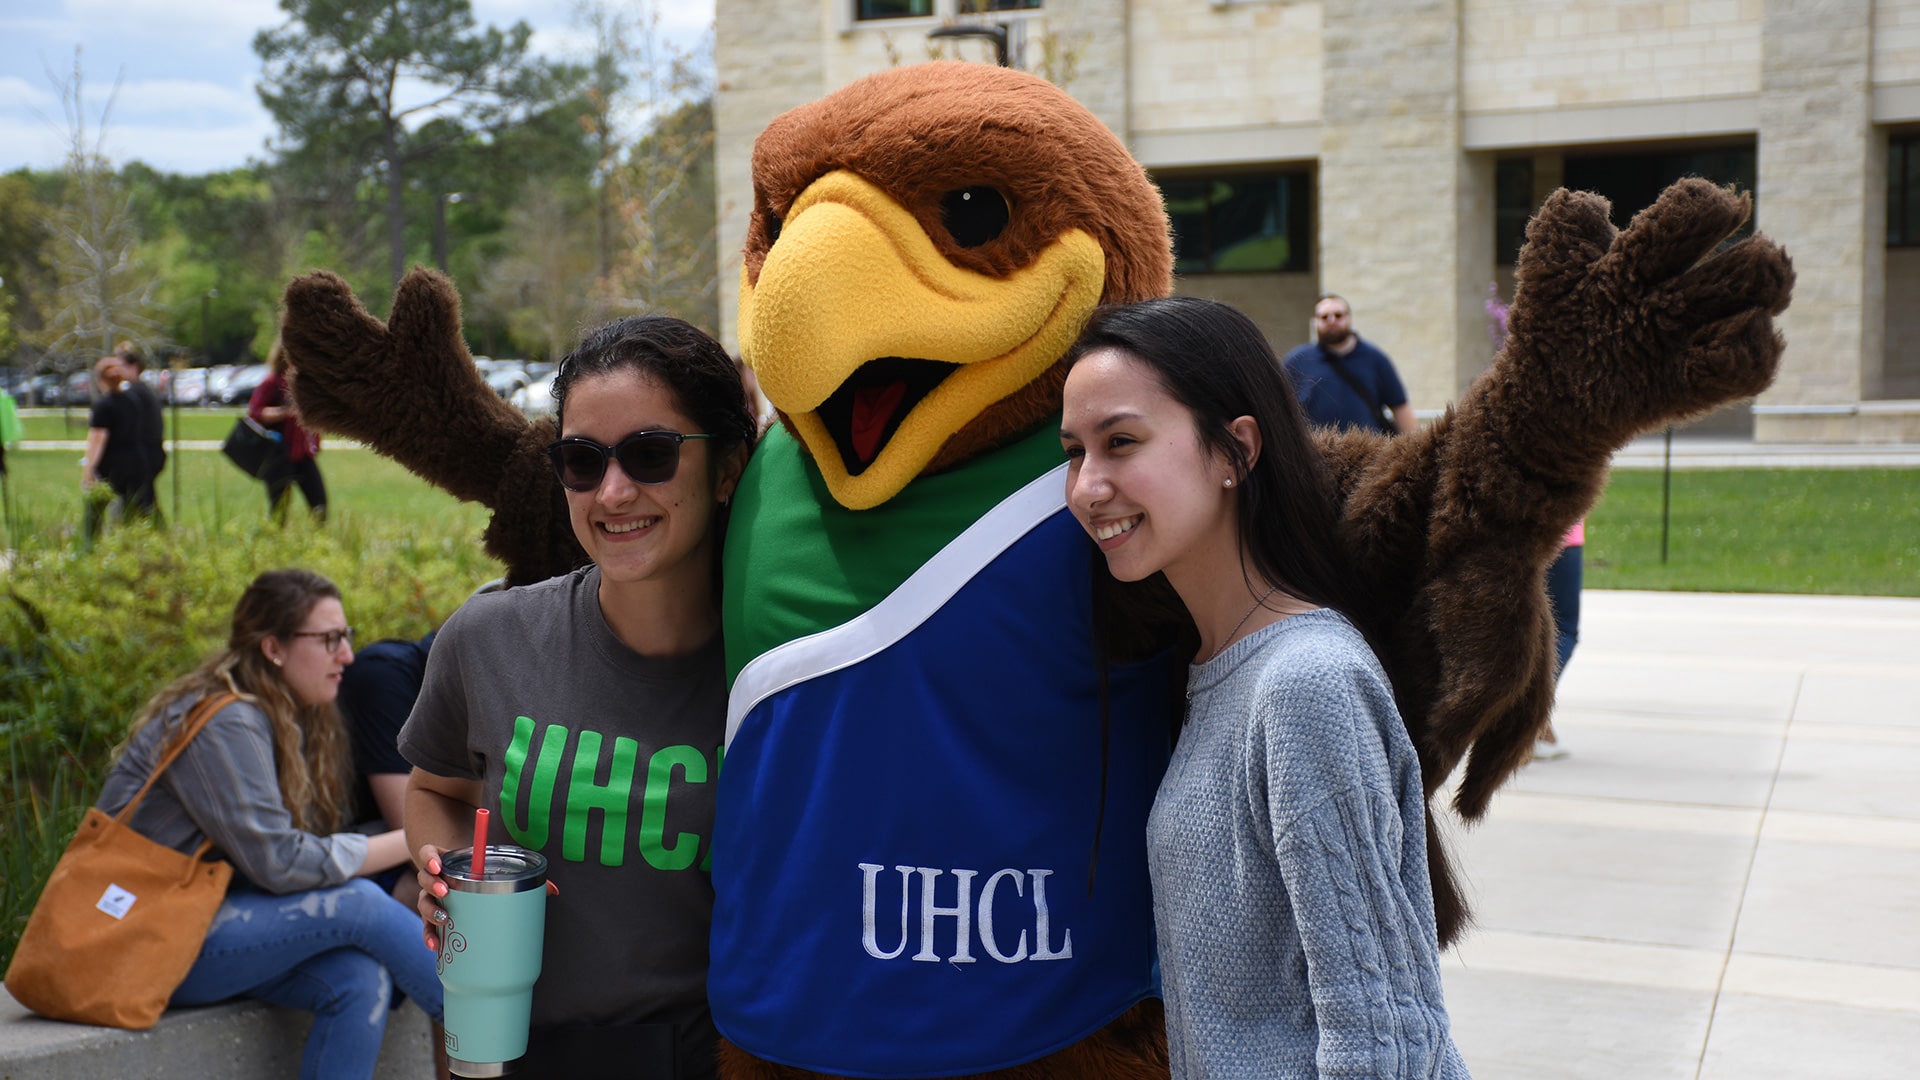 Explore campus, meet with advisers at UHCL Open House June 20